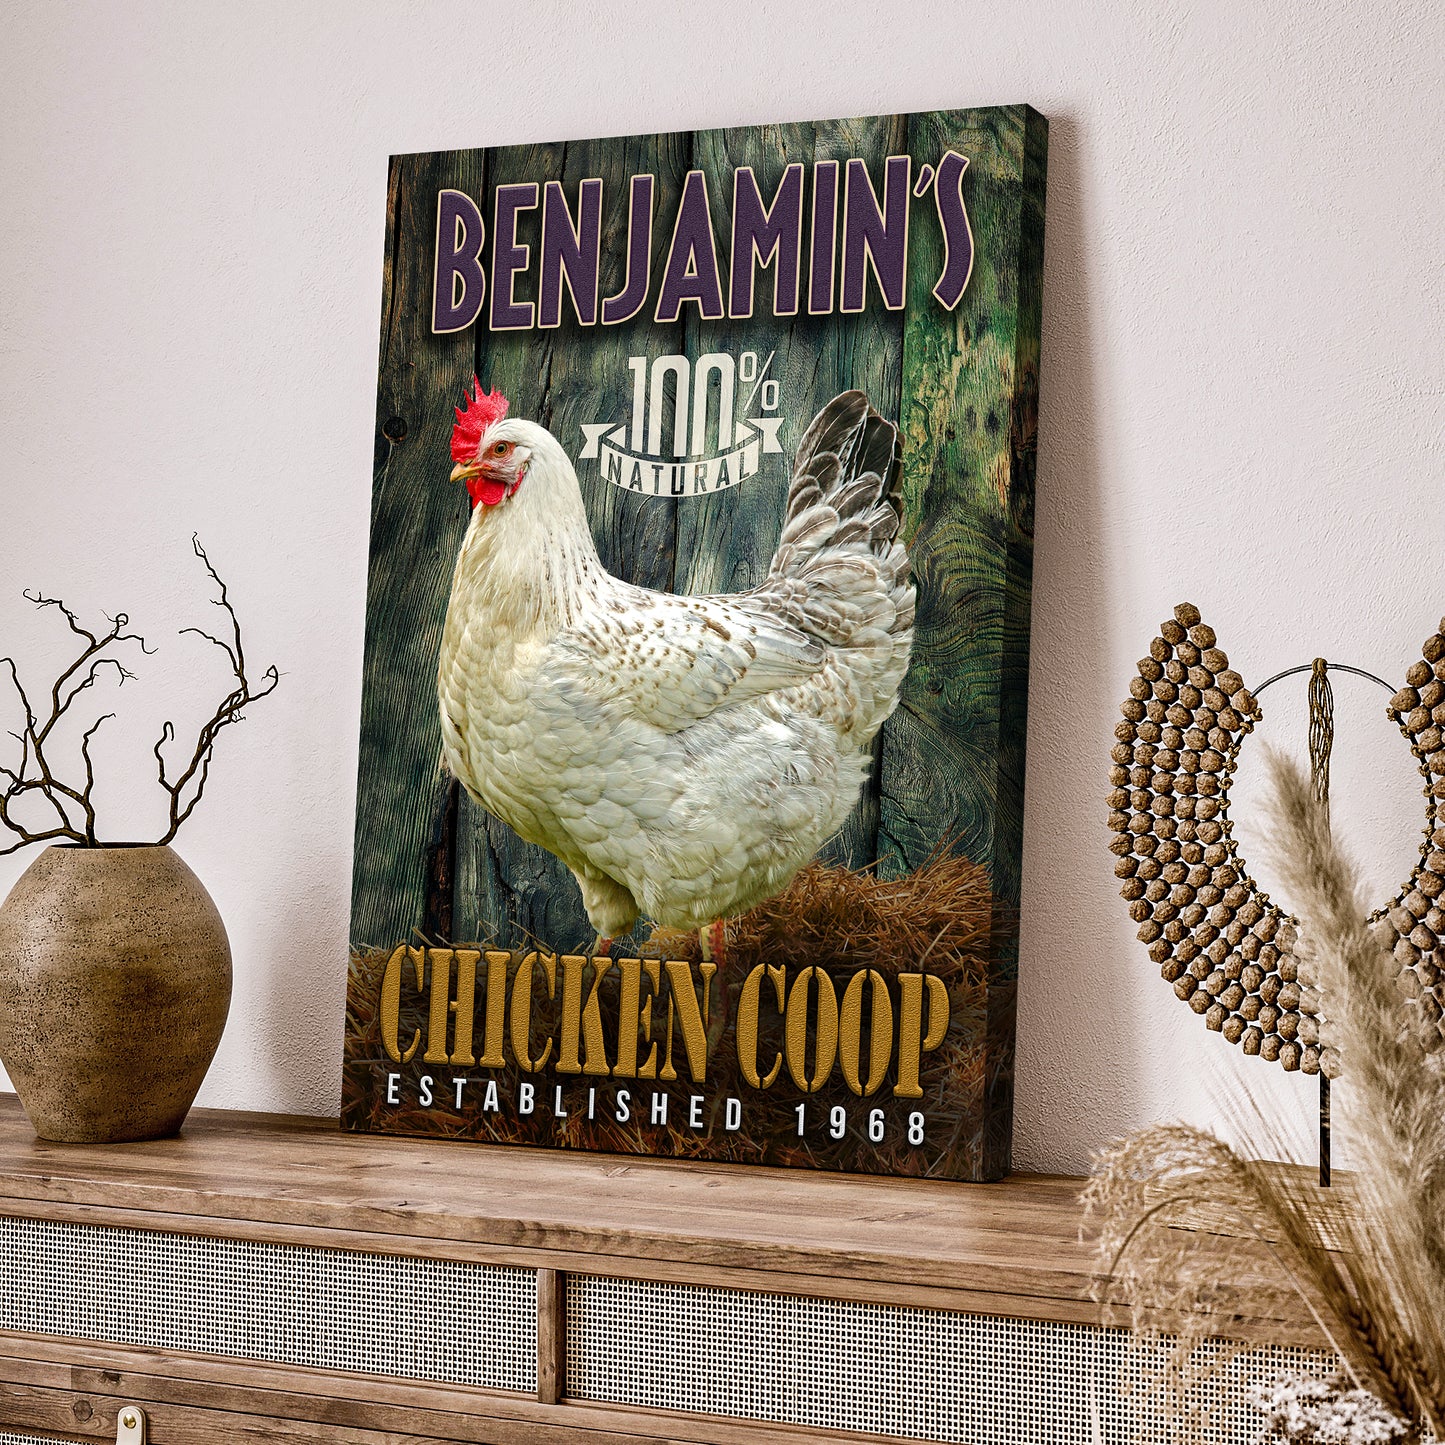 Chicken Coop 100% Natural Sign - Image by Tailored Canvases